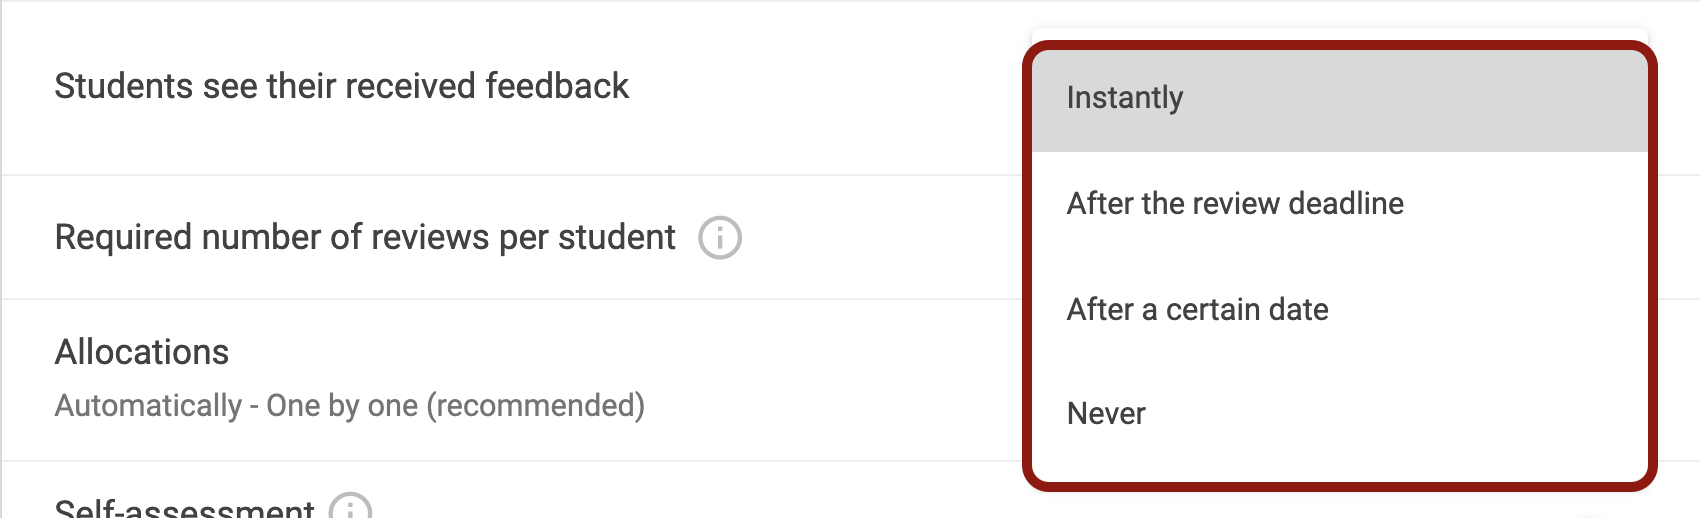 Select when students can see their received feedback